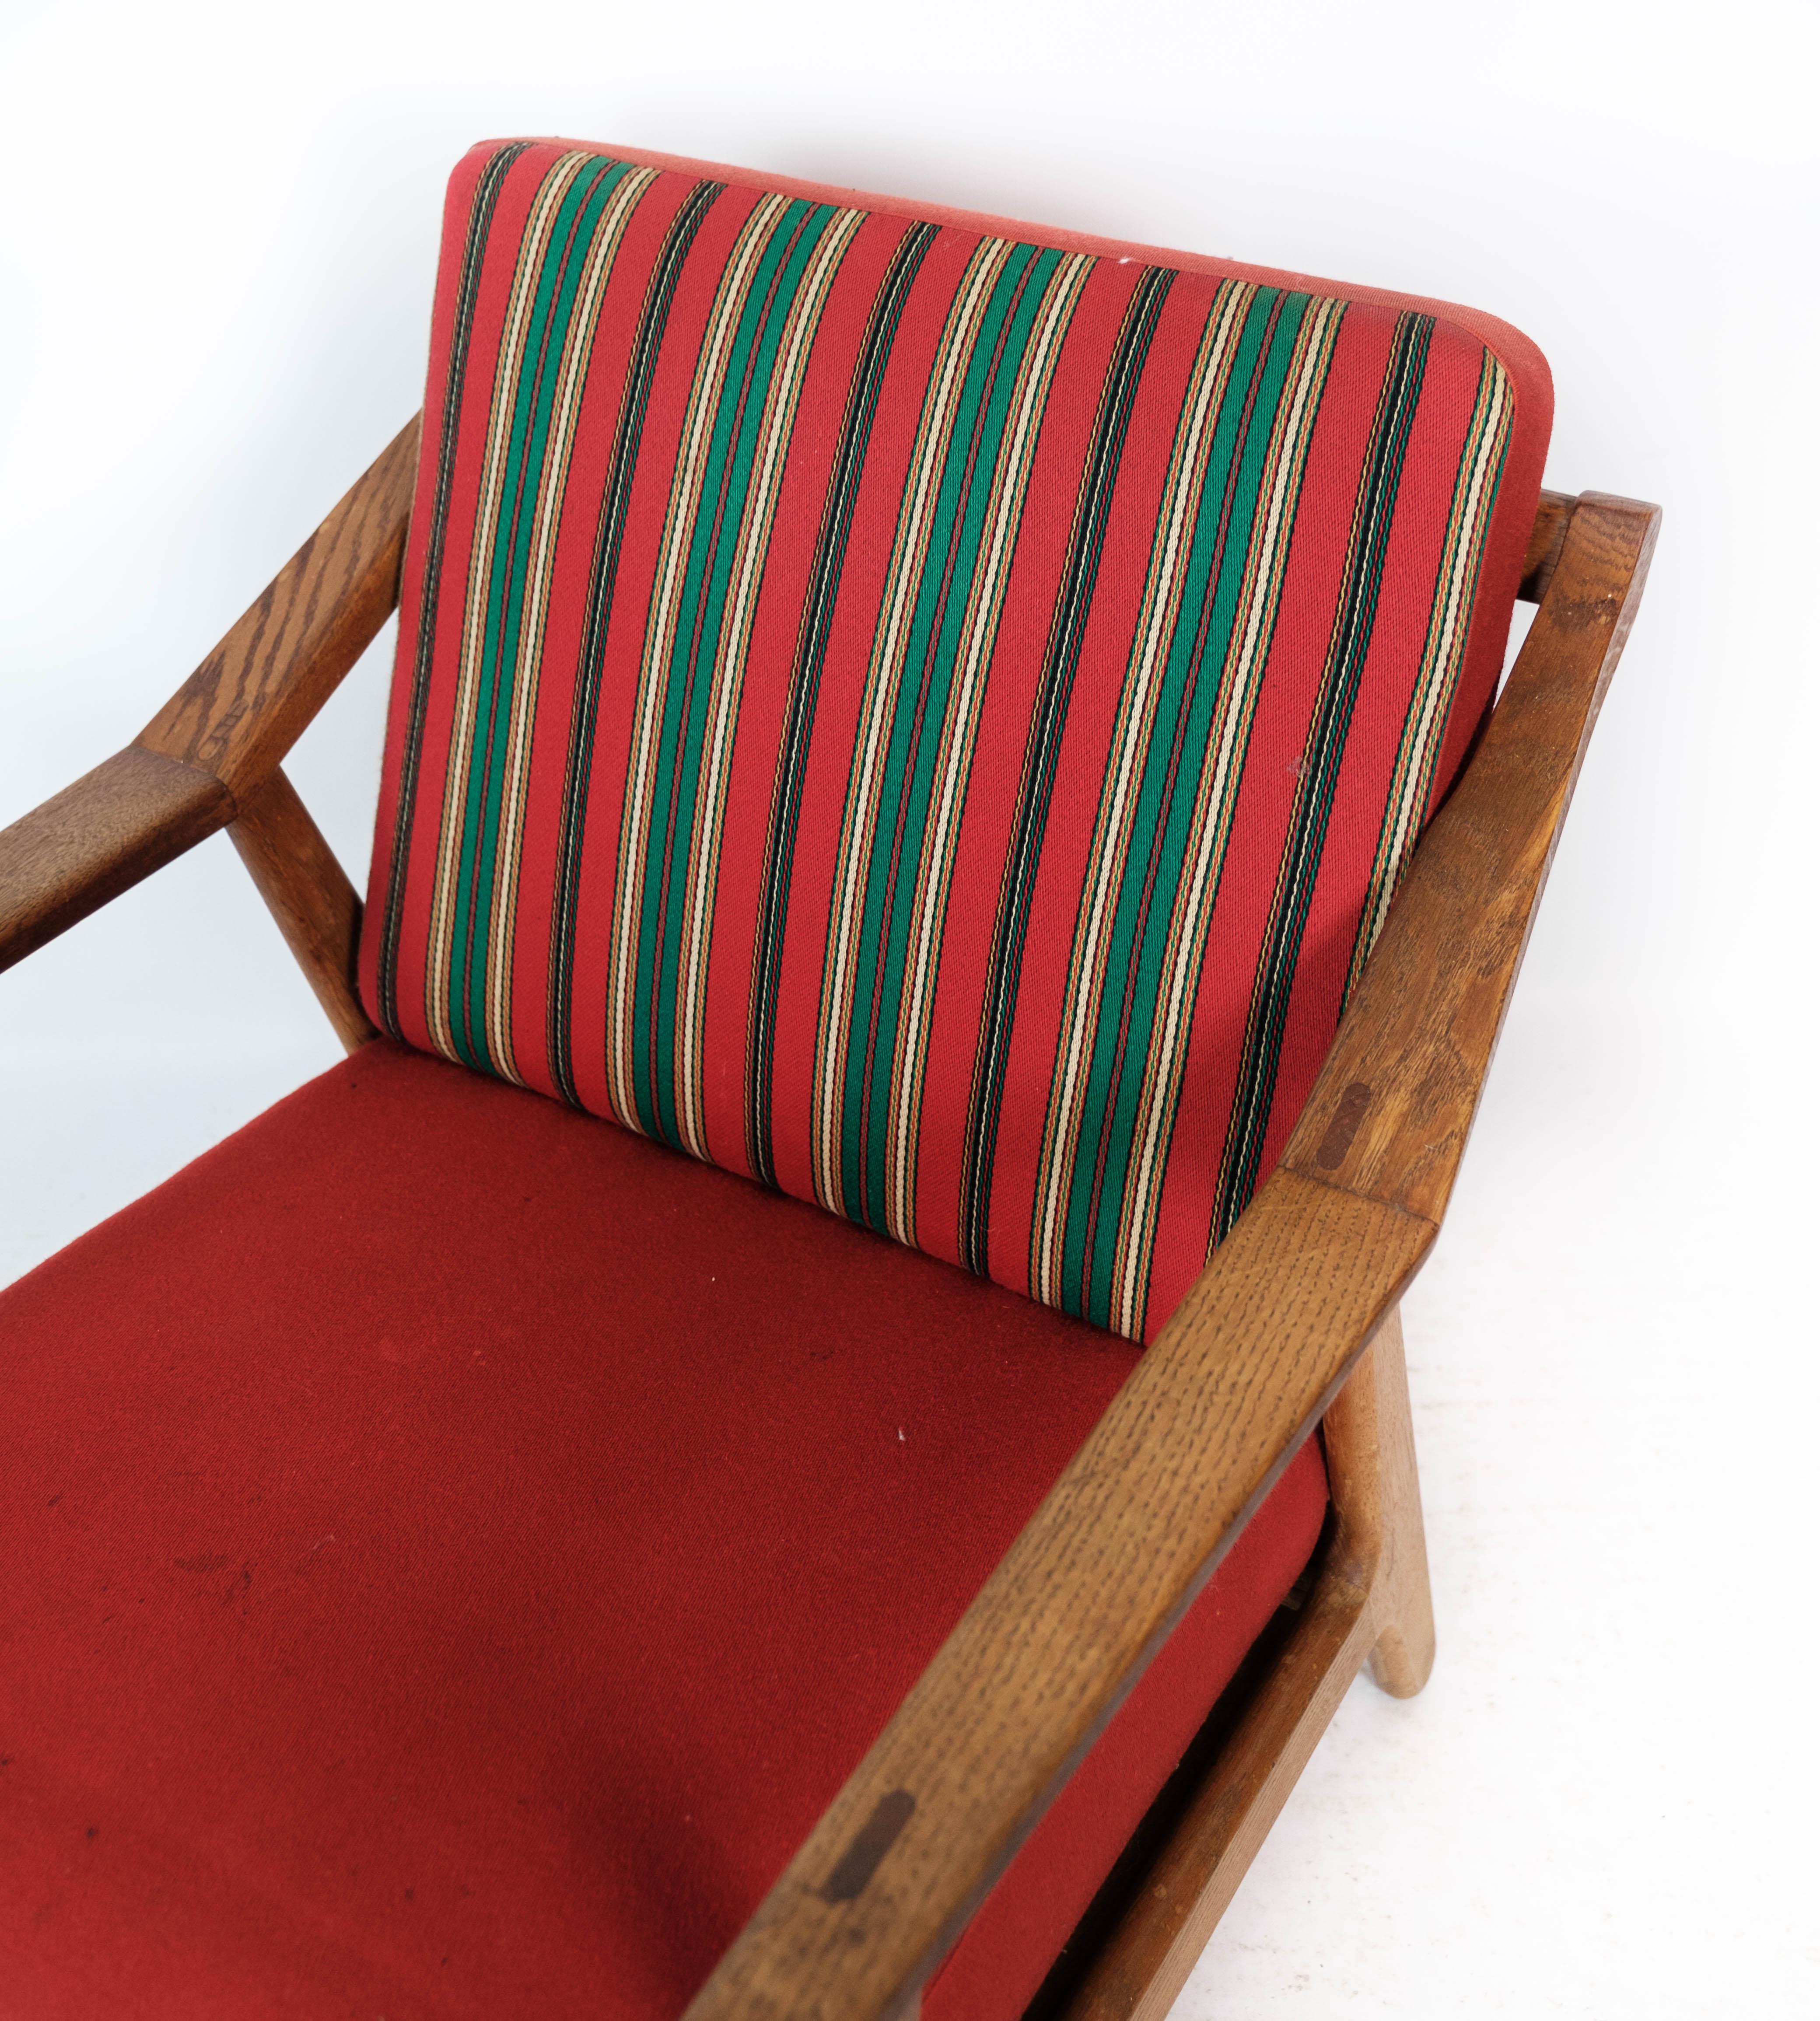 Armchair in oak and upholstered with red fabric, designed by H. Brockmann Petersen in the 1960s. The chair is in great vintage condition.